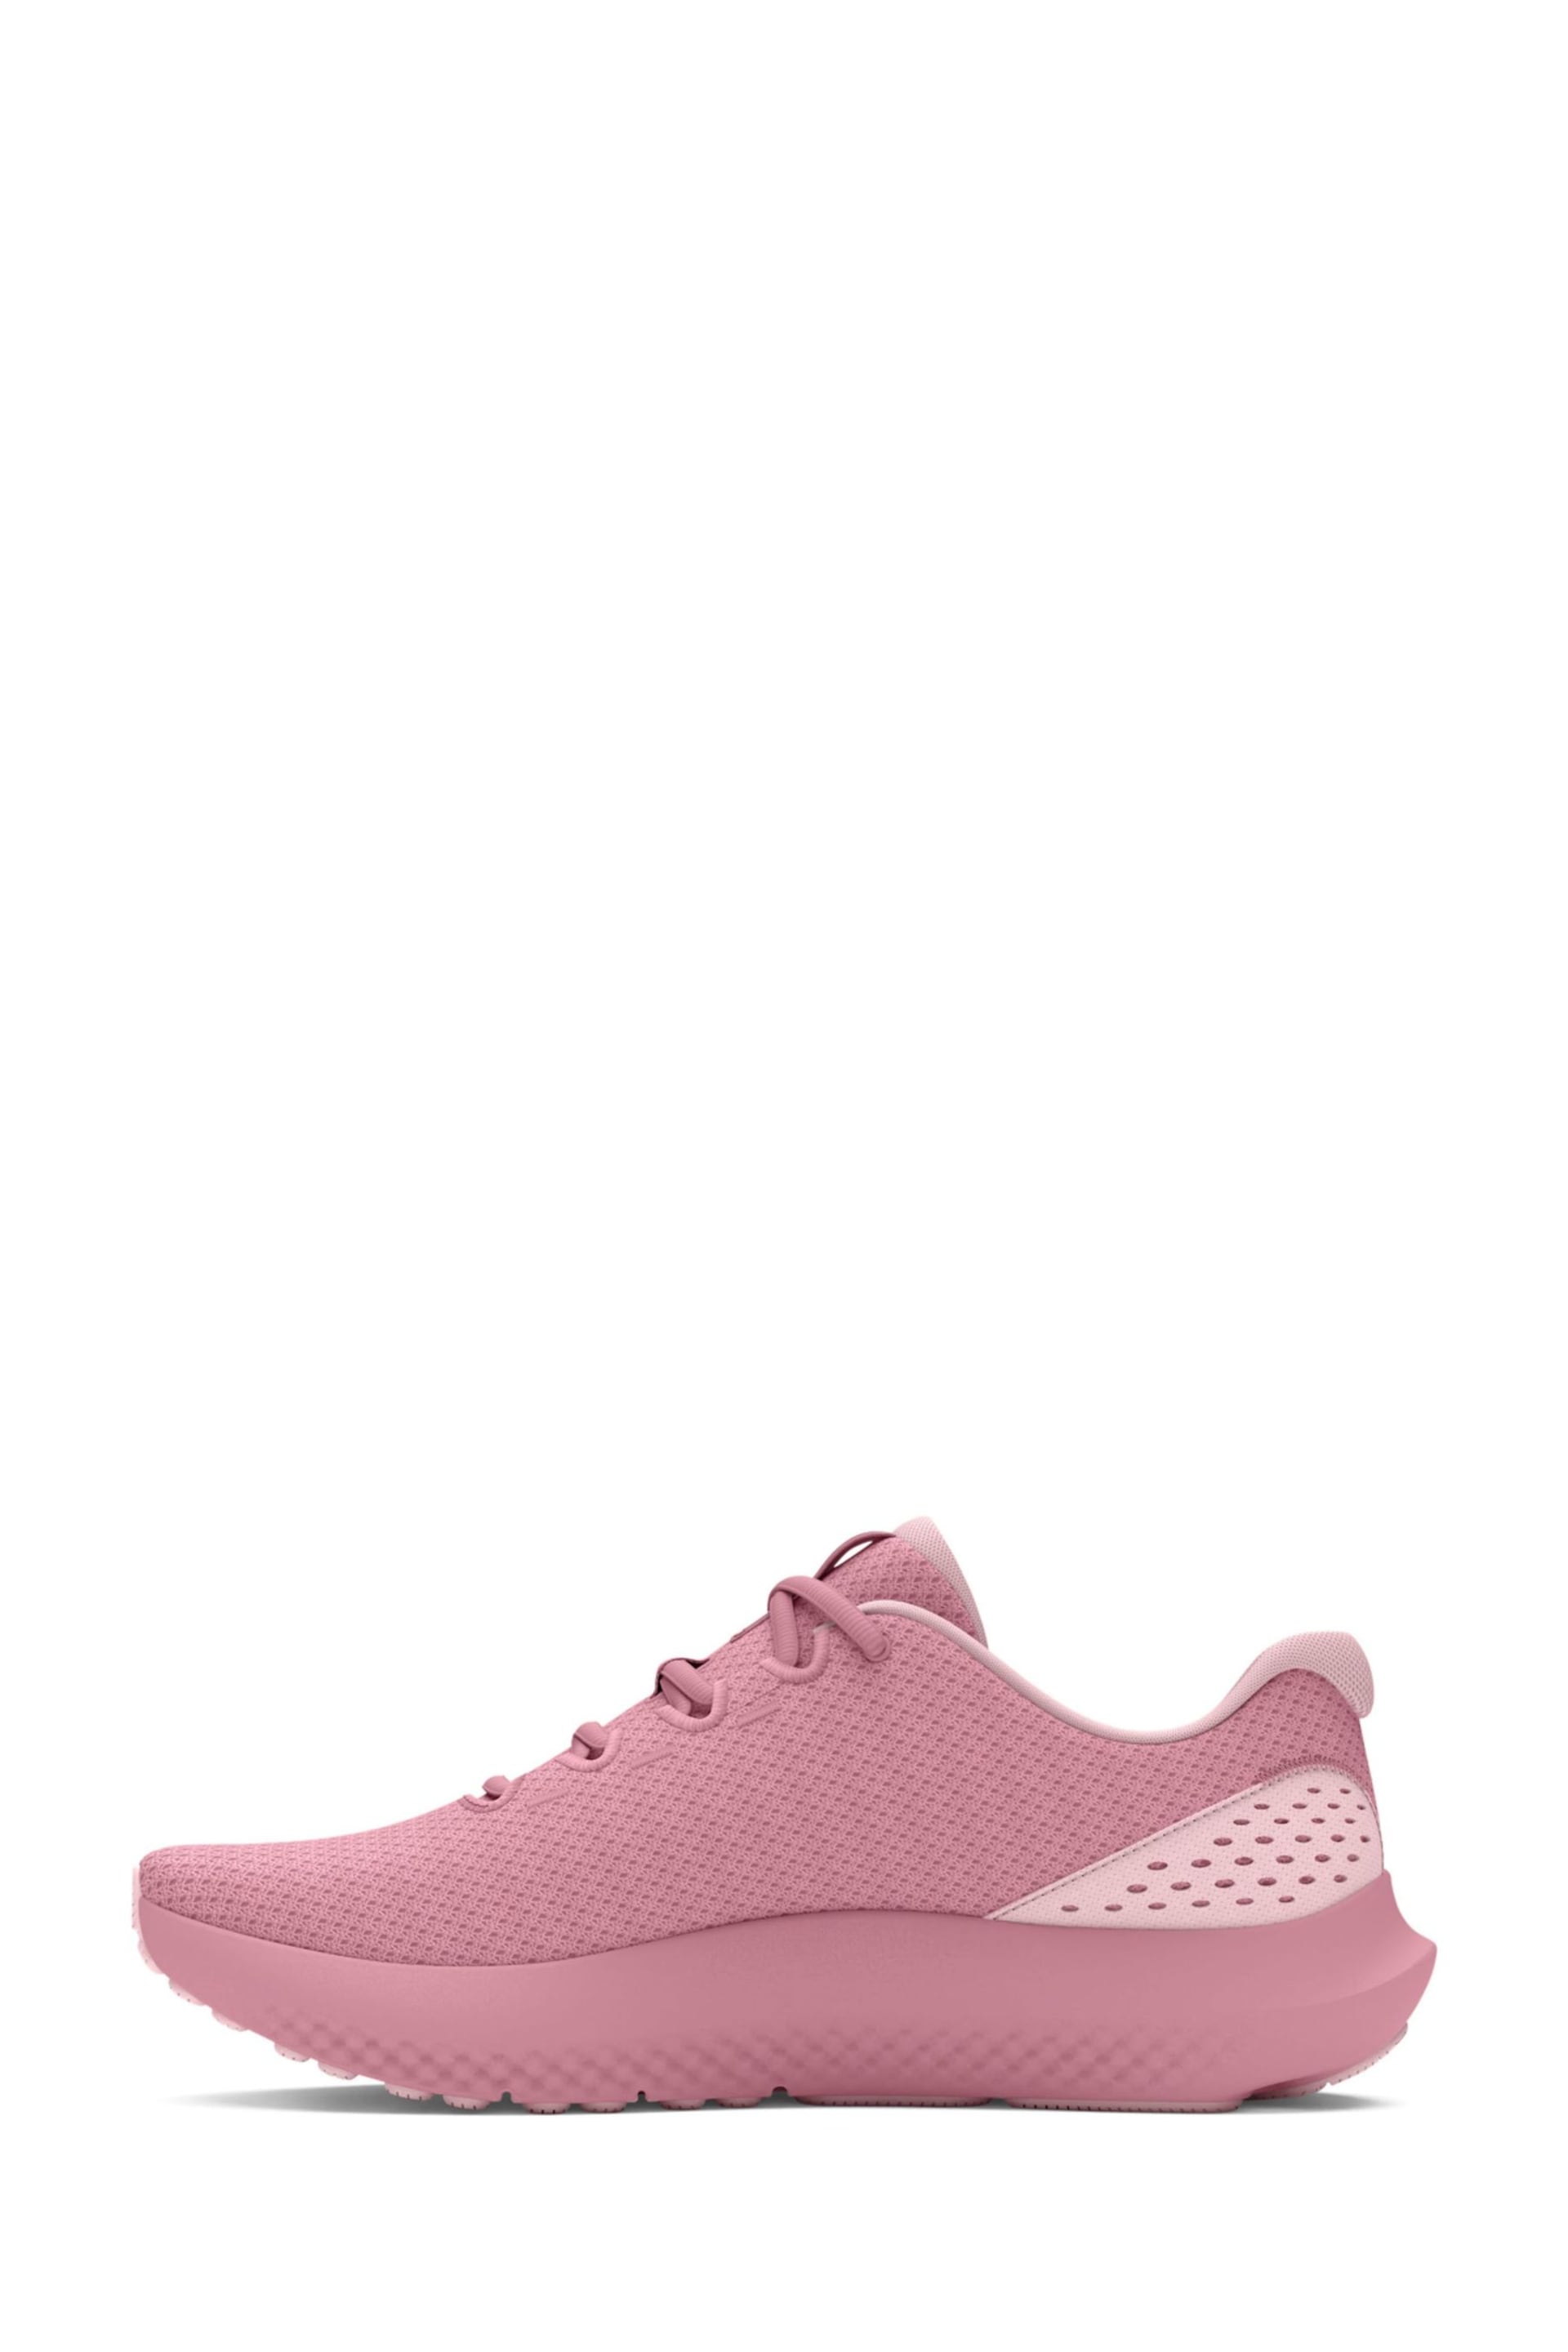 Under Armour Pink Charged Surge Trainers - Image 3 of 6